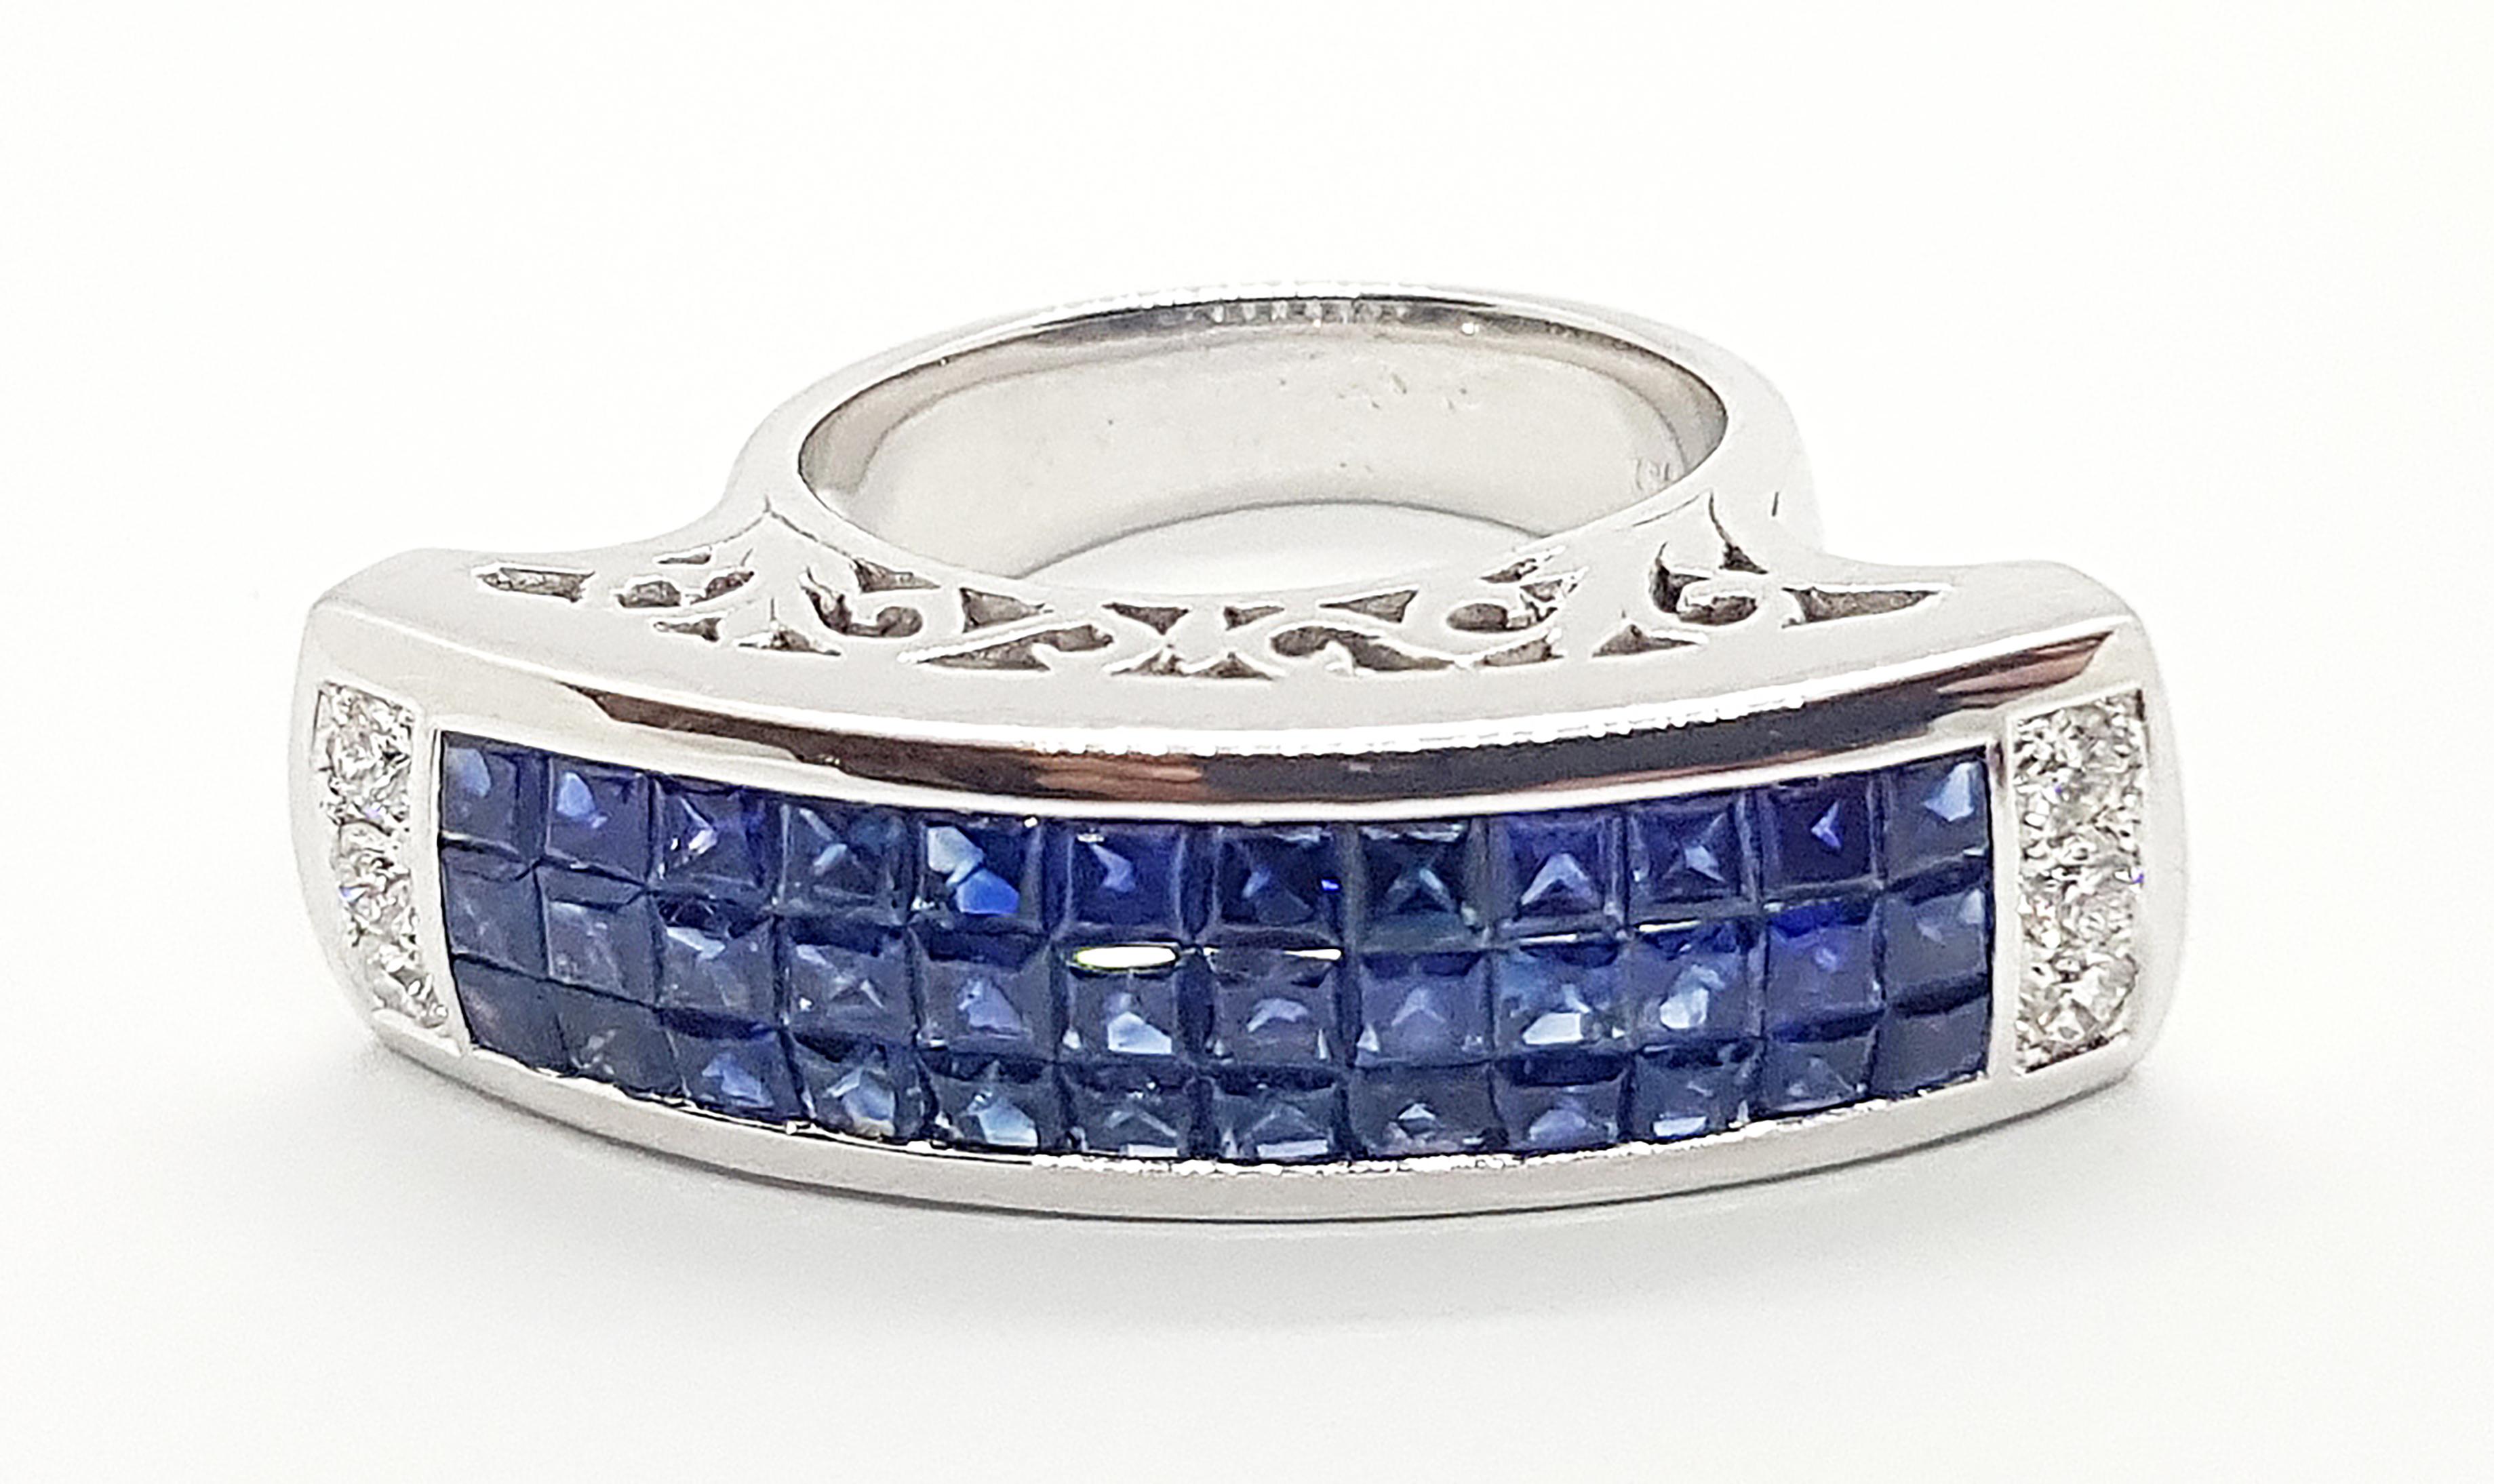 Blue Sapphire 4.14 carats with Diamond 0.25 carat Ring set in 18 Karat White Gold Settings

Width:  3.4 cm 
Length: 0.9 cm
Ring Size: 53
Total Weight: 16.69 grams

